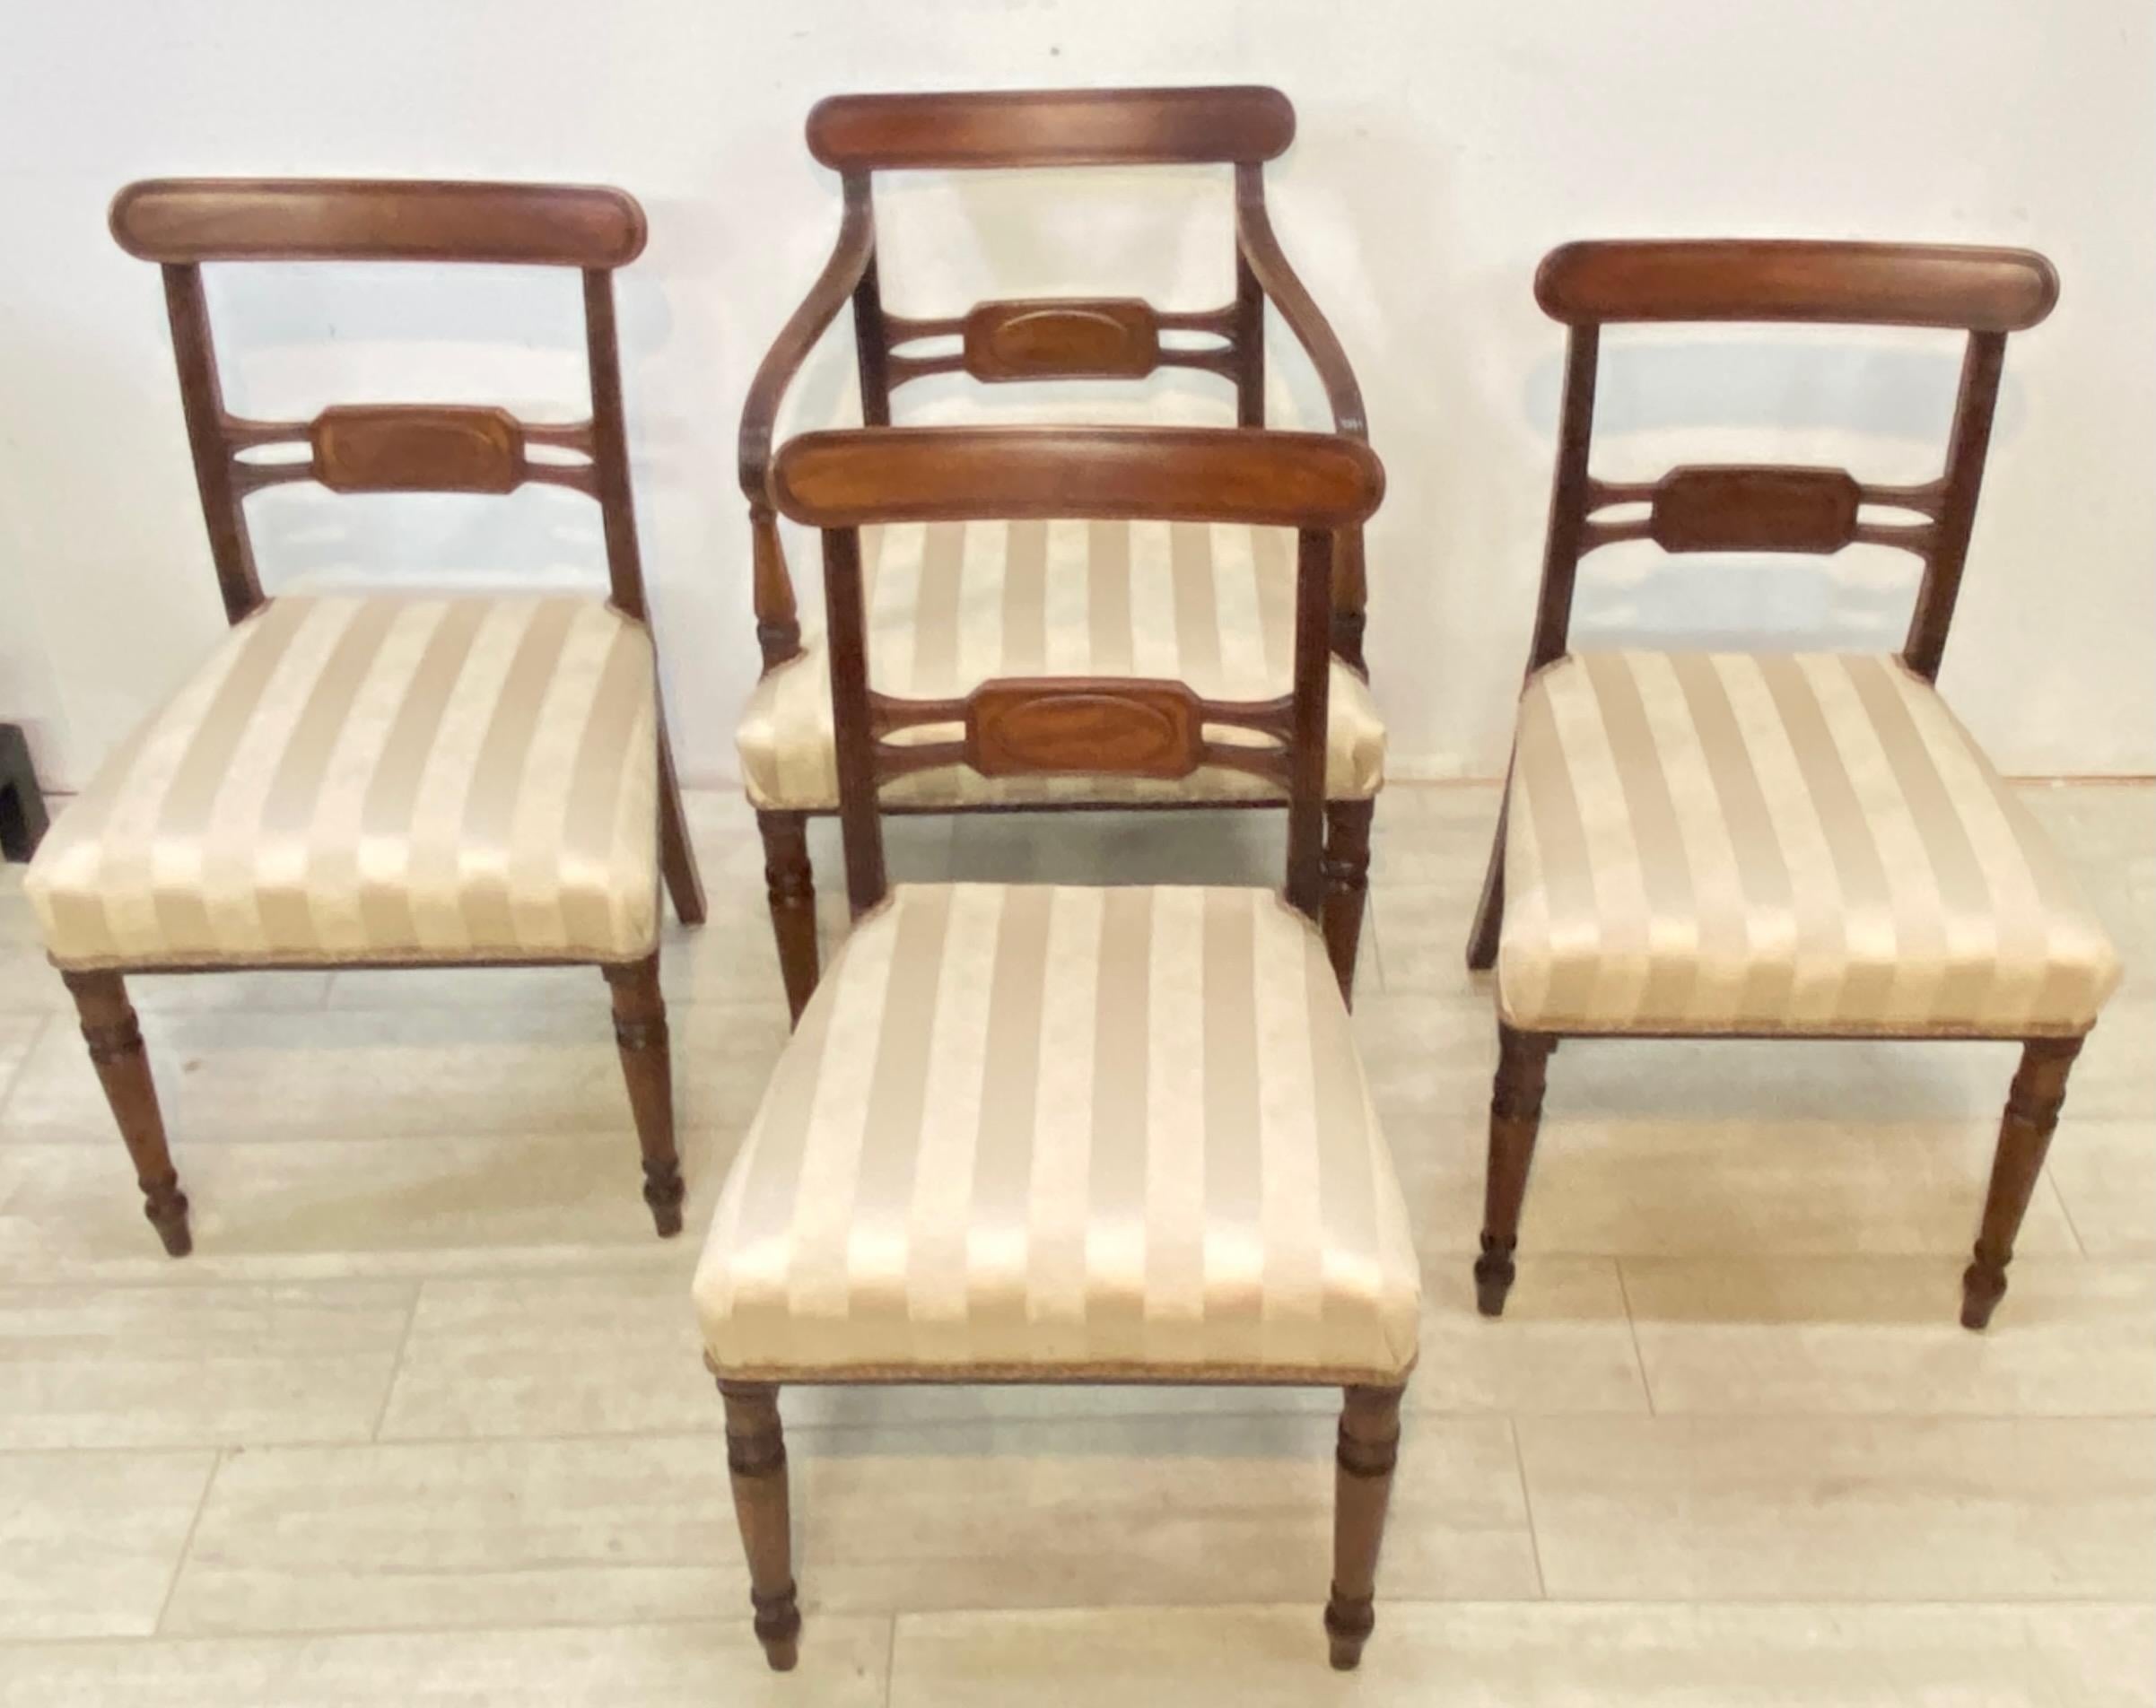 Set of 4 Early 19th Century English Regency Mahogany Dining Chairs, circa 1820 For Sale 2